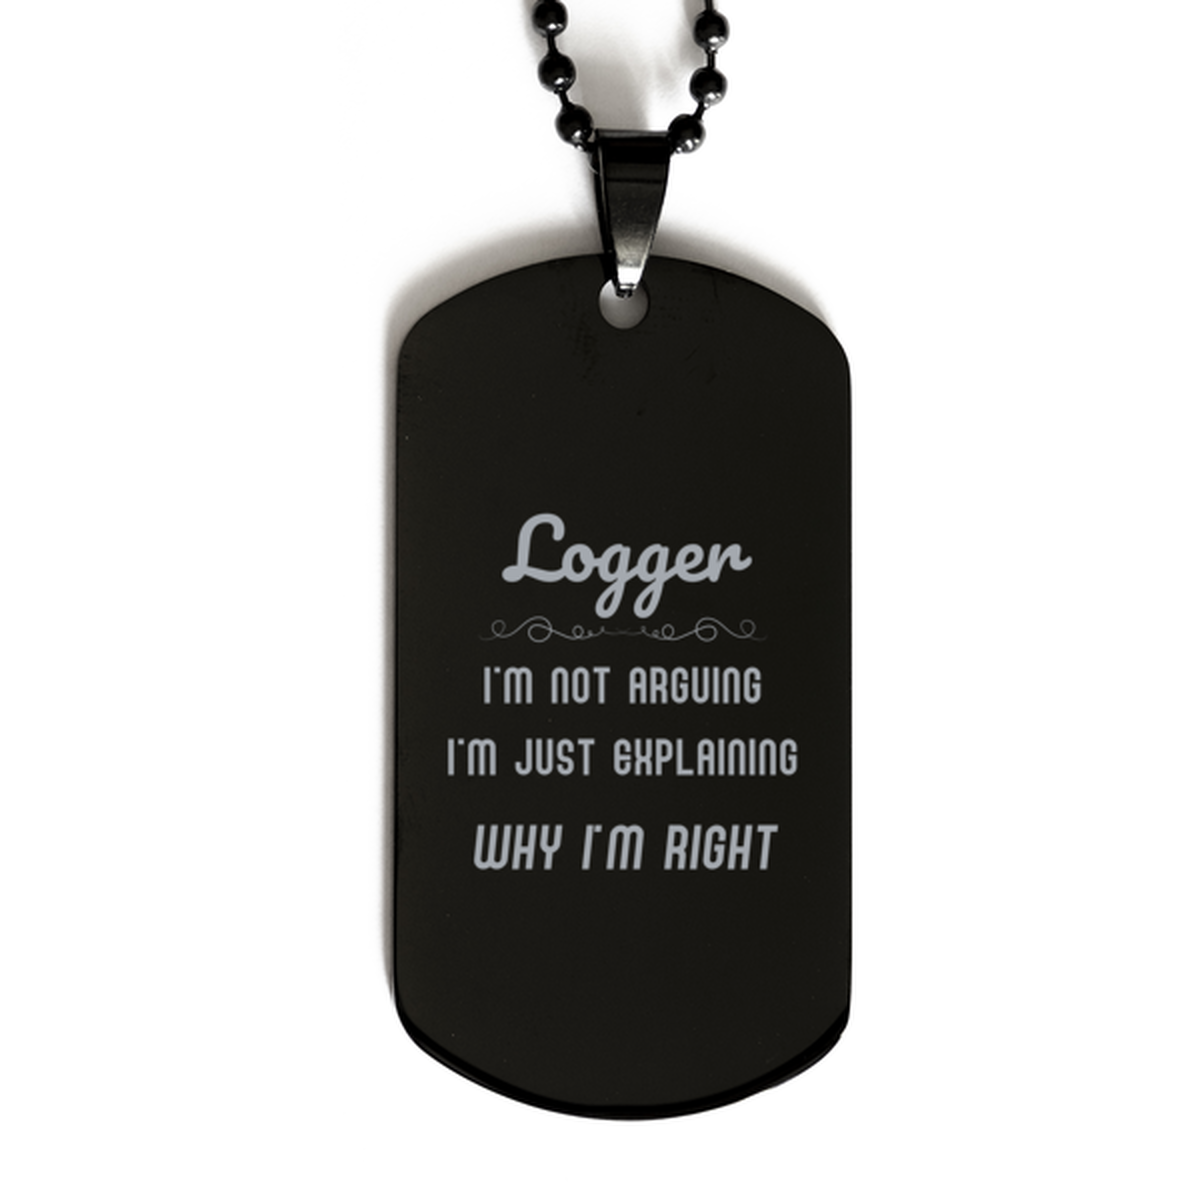 Logger I'm not Arguing. I'm Just Explaining Why I'm RIGHT Black Dog Tag, Funny Saying Quote Logger Gifts For Logger Graduation Birthday Christmas Gifts for Men Women Coworker